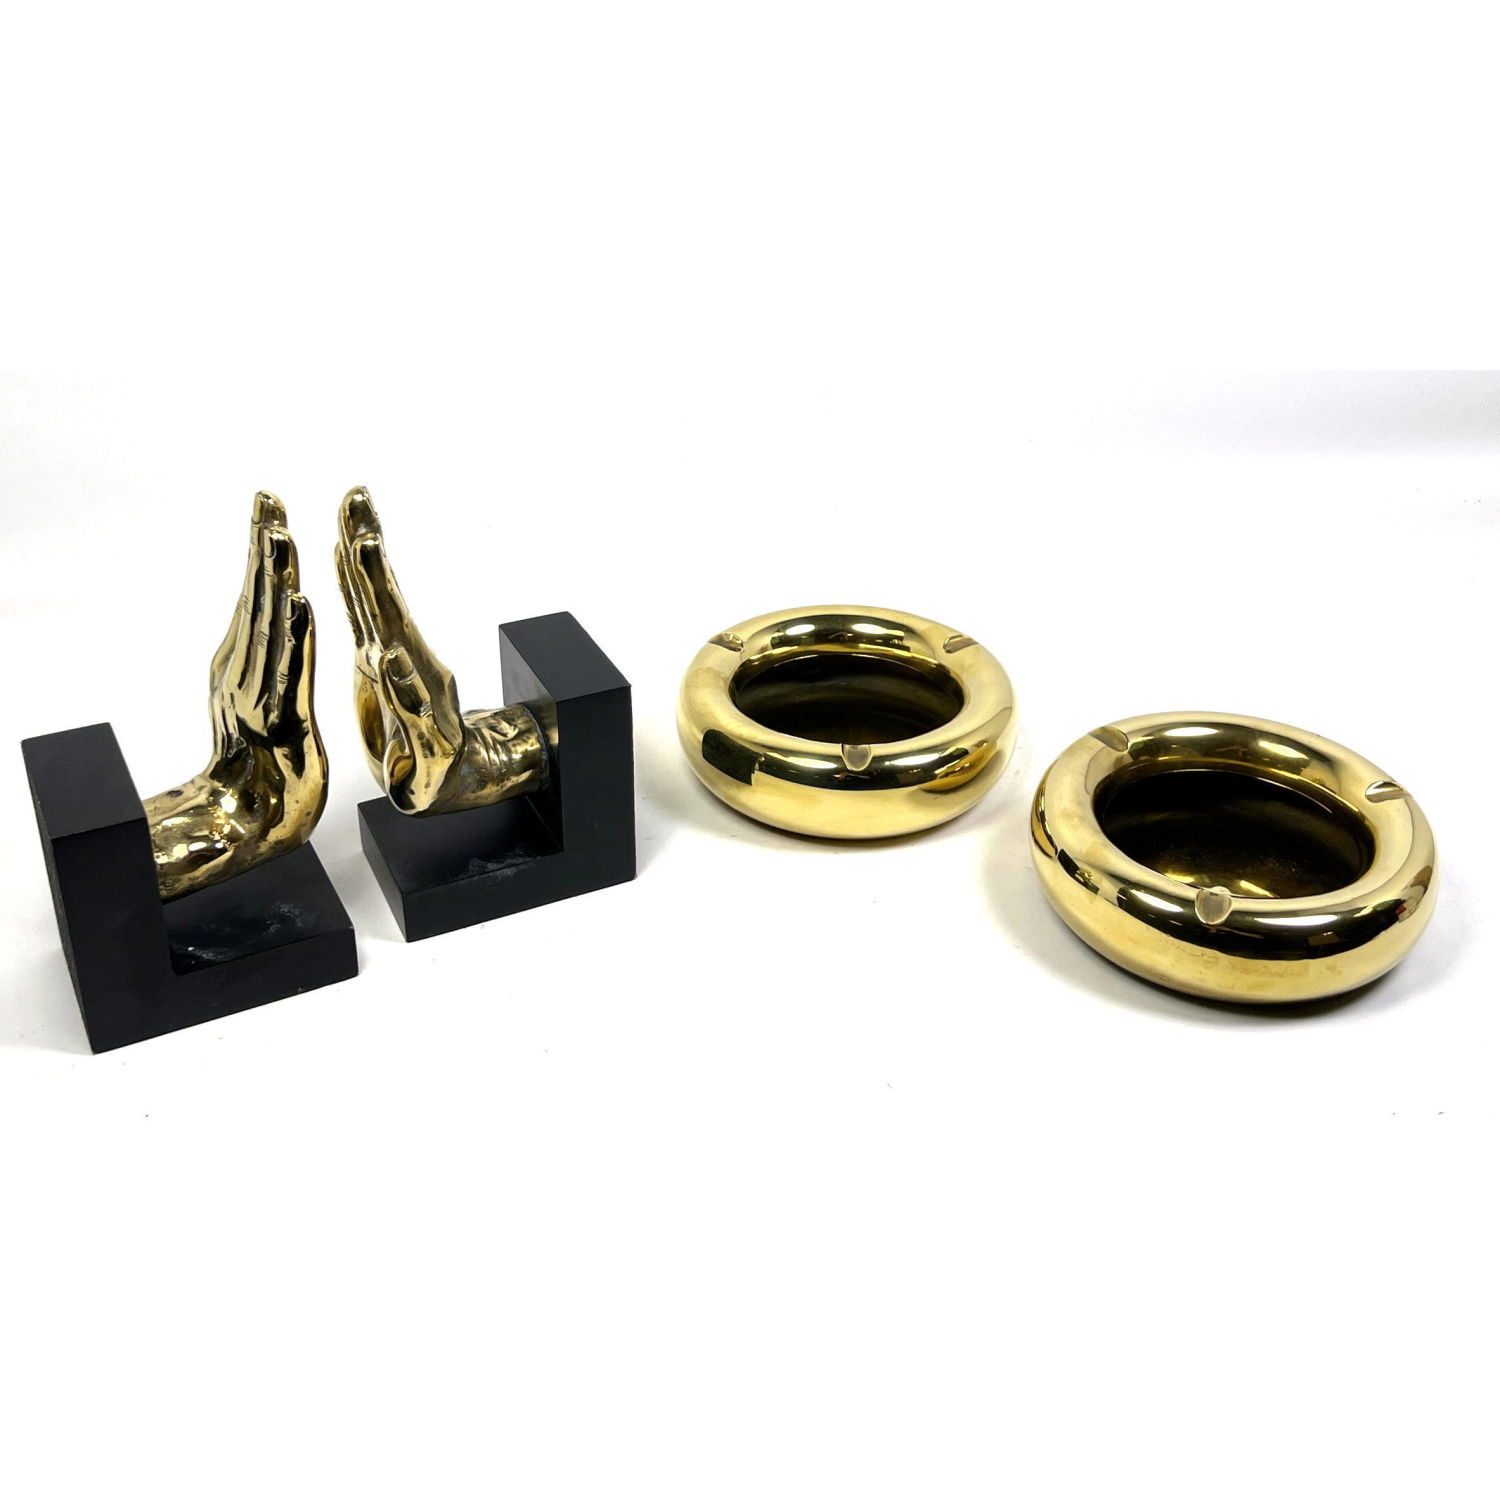 Global Views Lot. Gold Hand Bookends